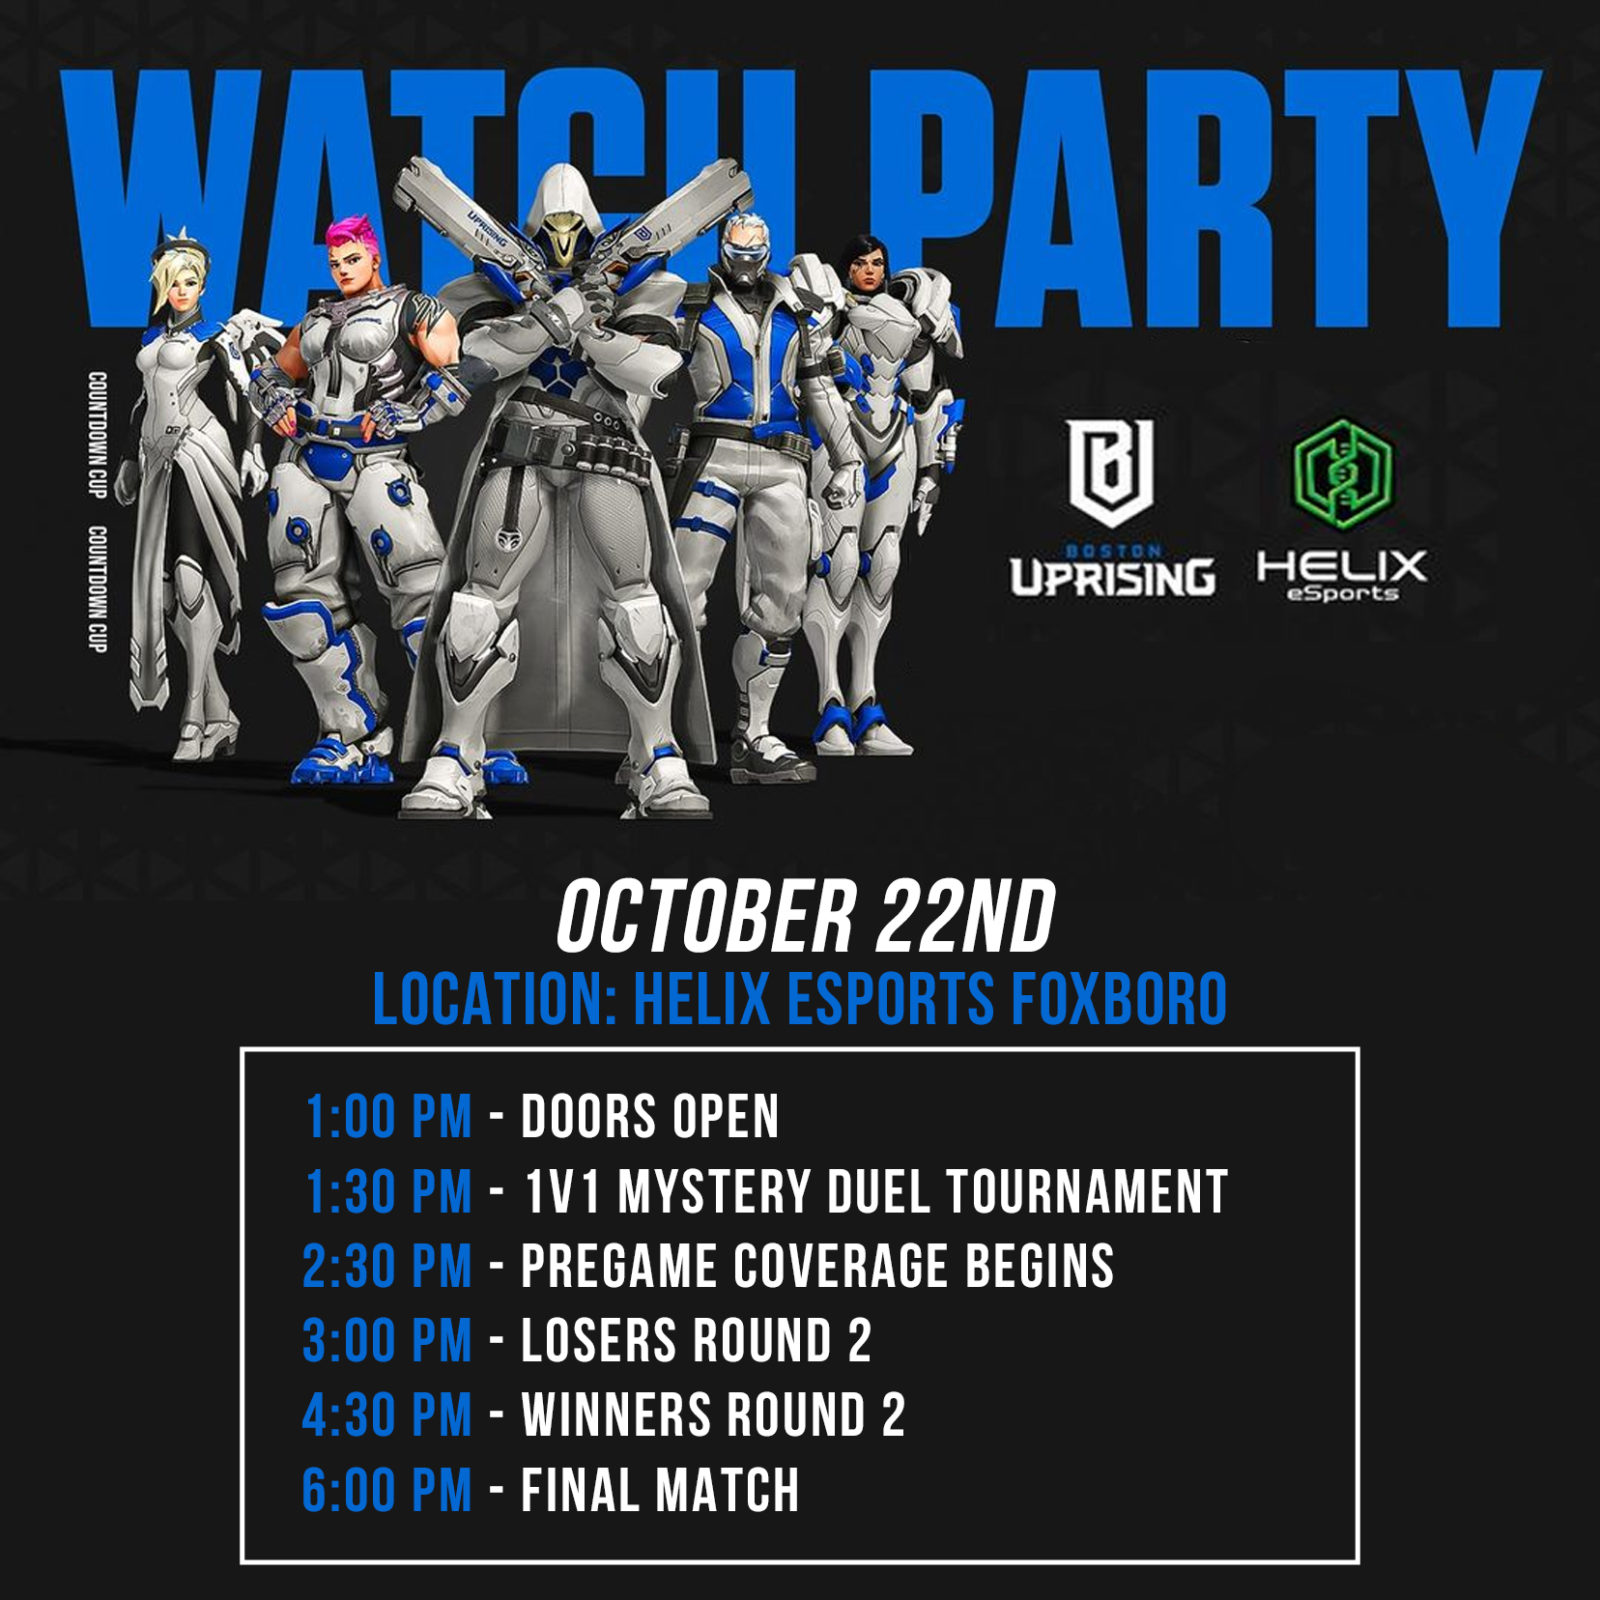 Helix Uprising Watch Party October 22